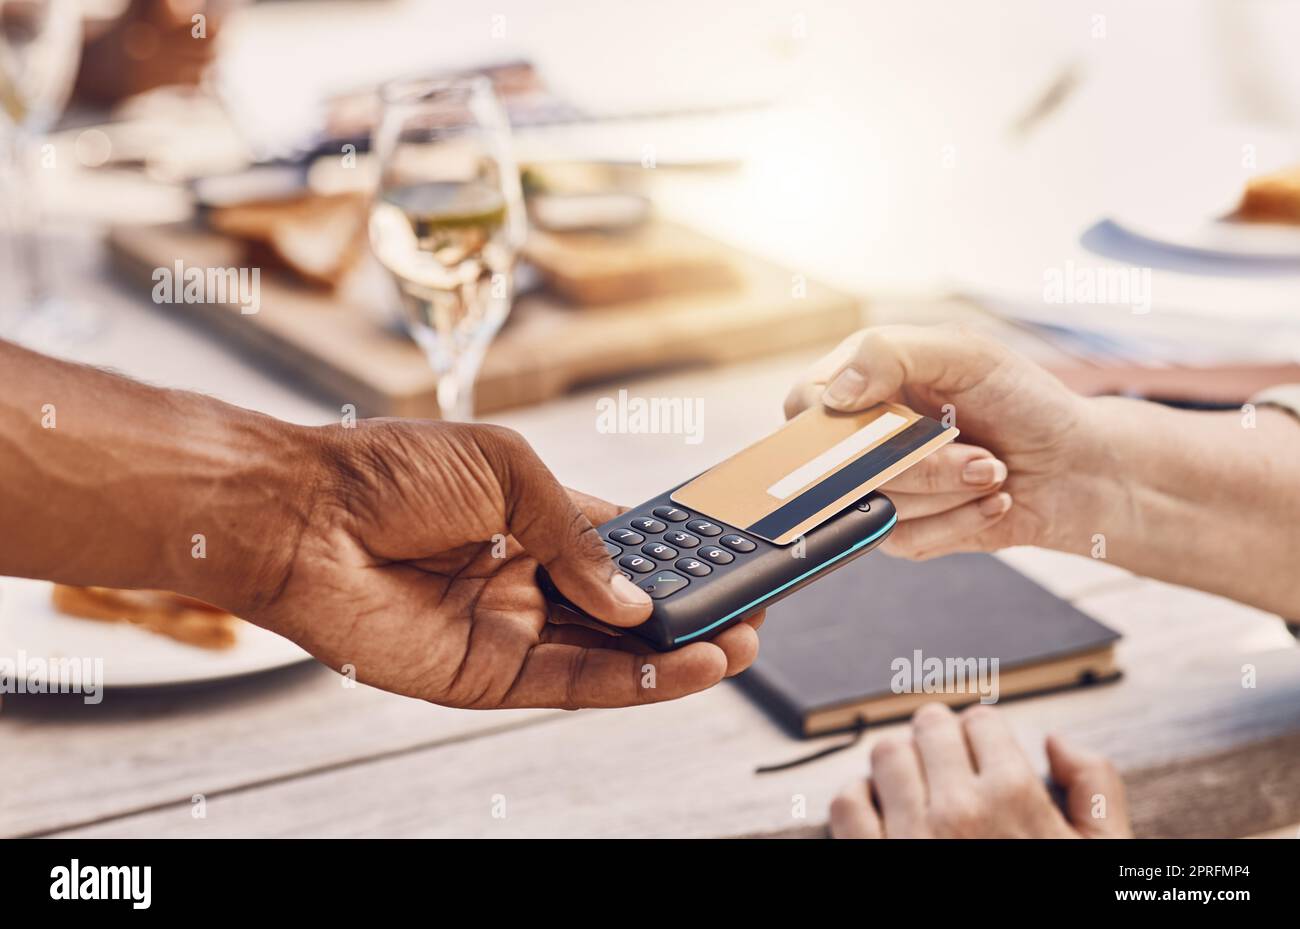 Restaurant customer payment with credit card on machine or digital tech for contactless and secure payment while fine dining. Food business manager or waiter hands using 5g to tap or scan a bank card Stock Photo